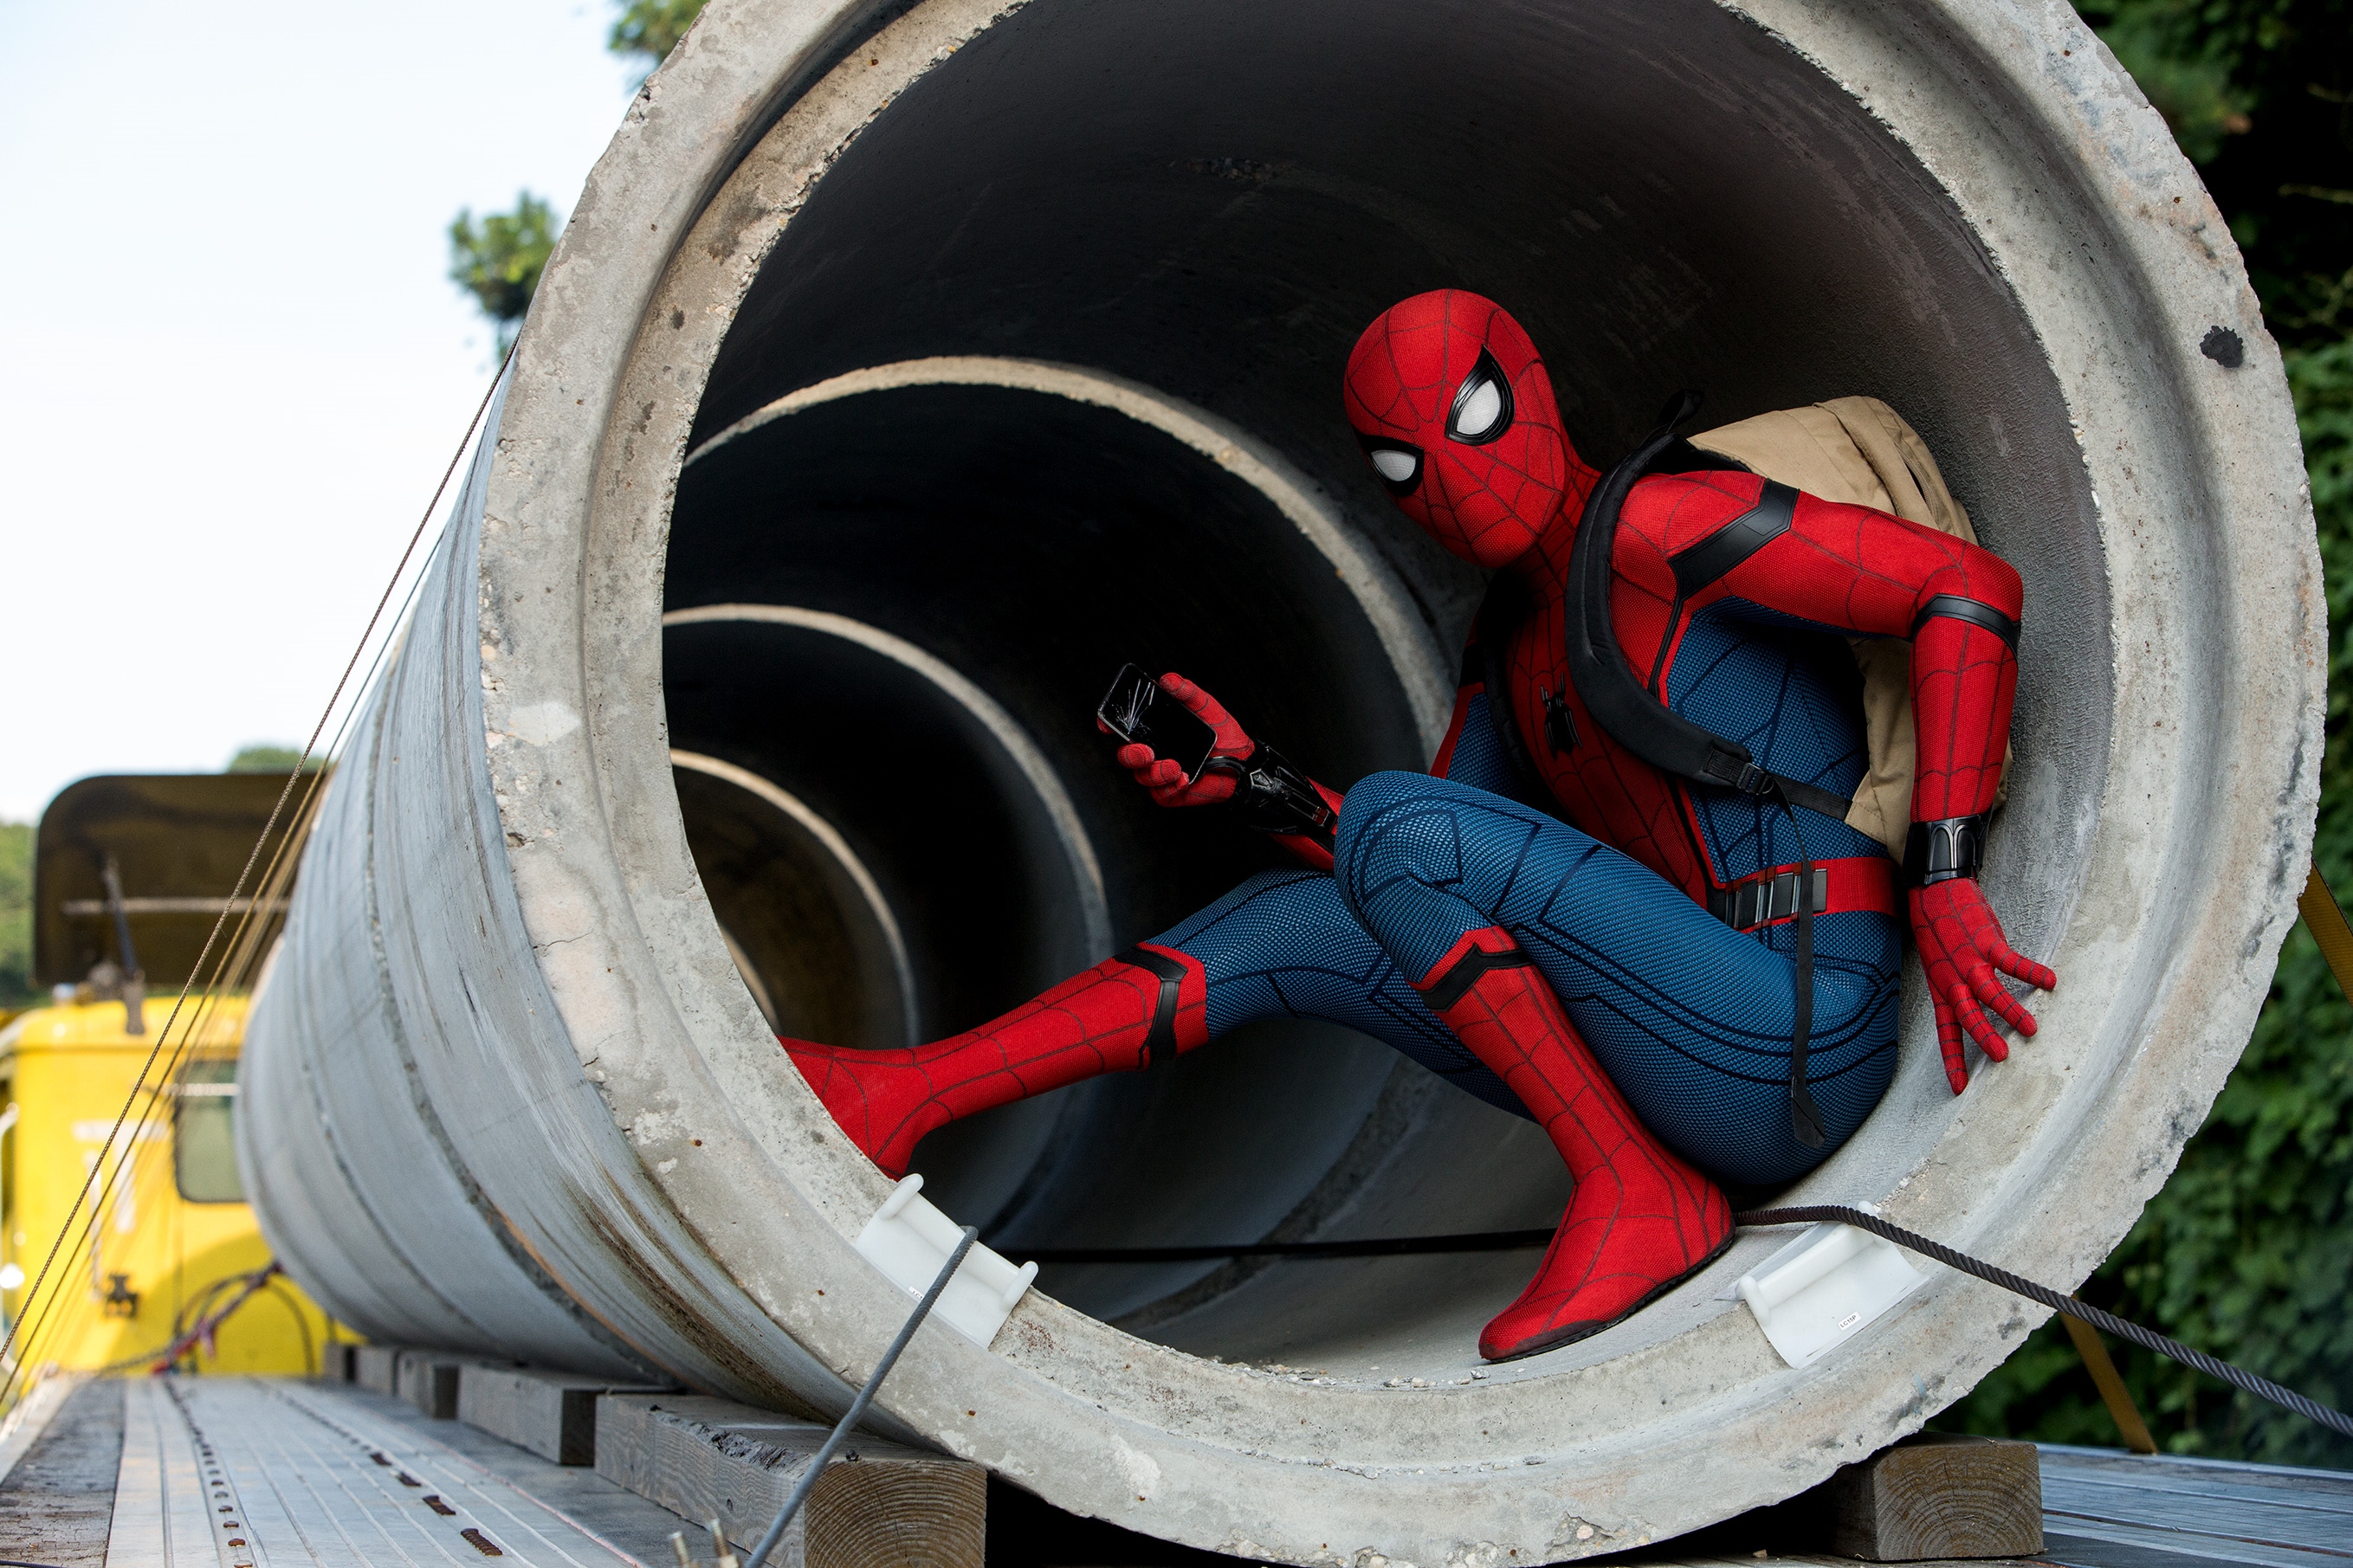 Image du film Spider-Man : Homecoming 2bfb6a2a-9520-4212-a1bf-a7fadcfe15f0